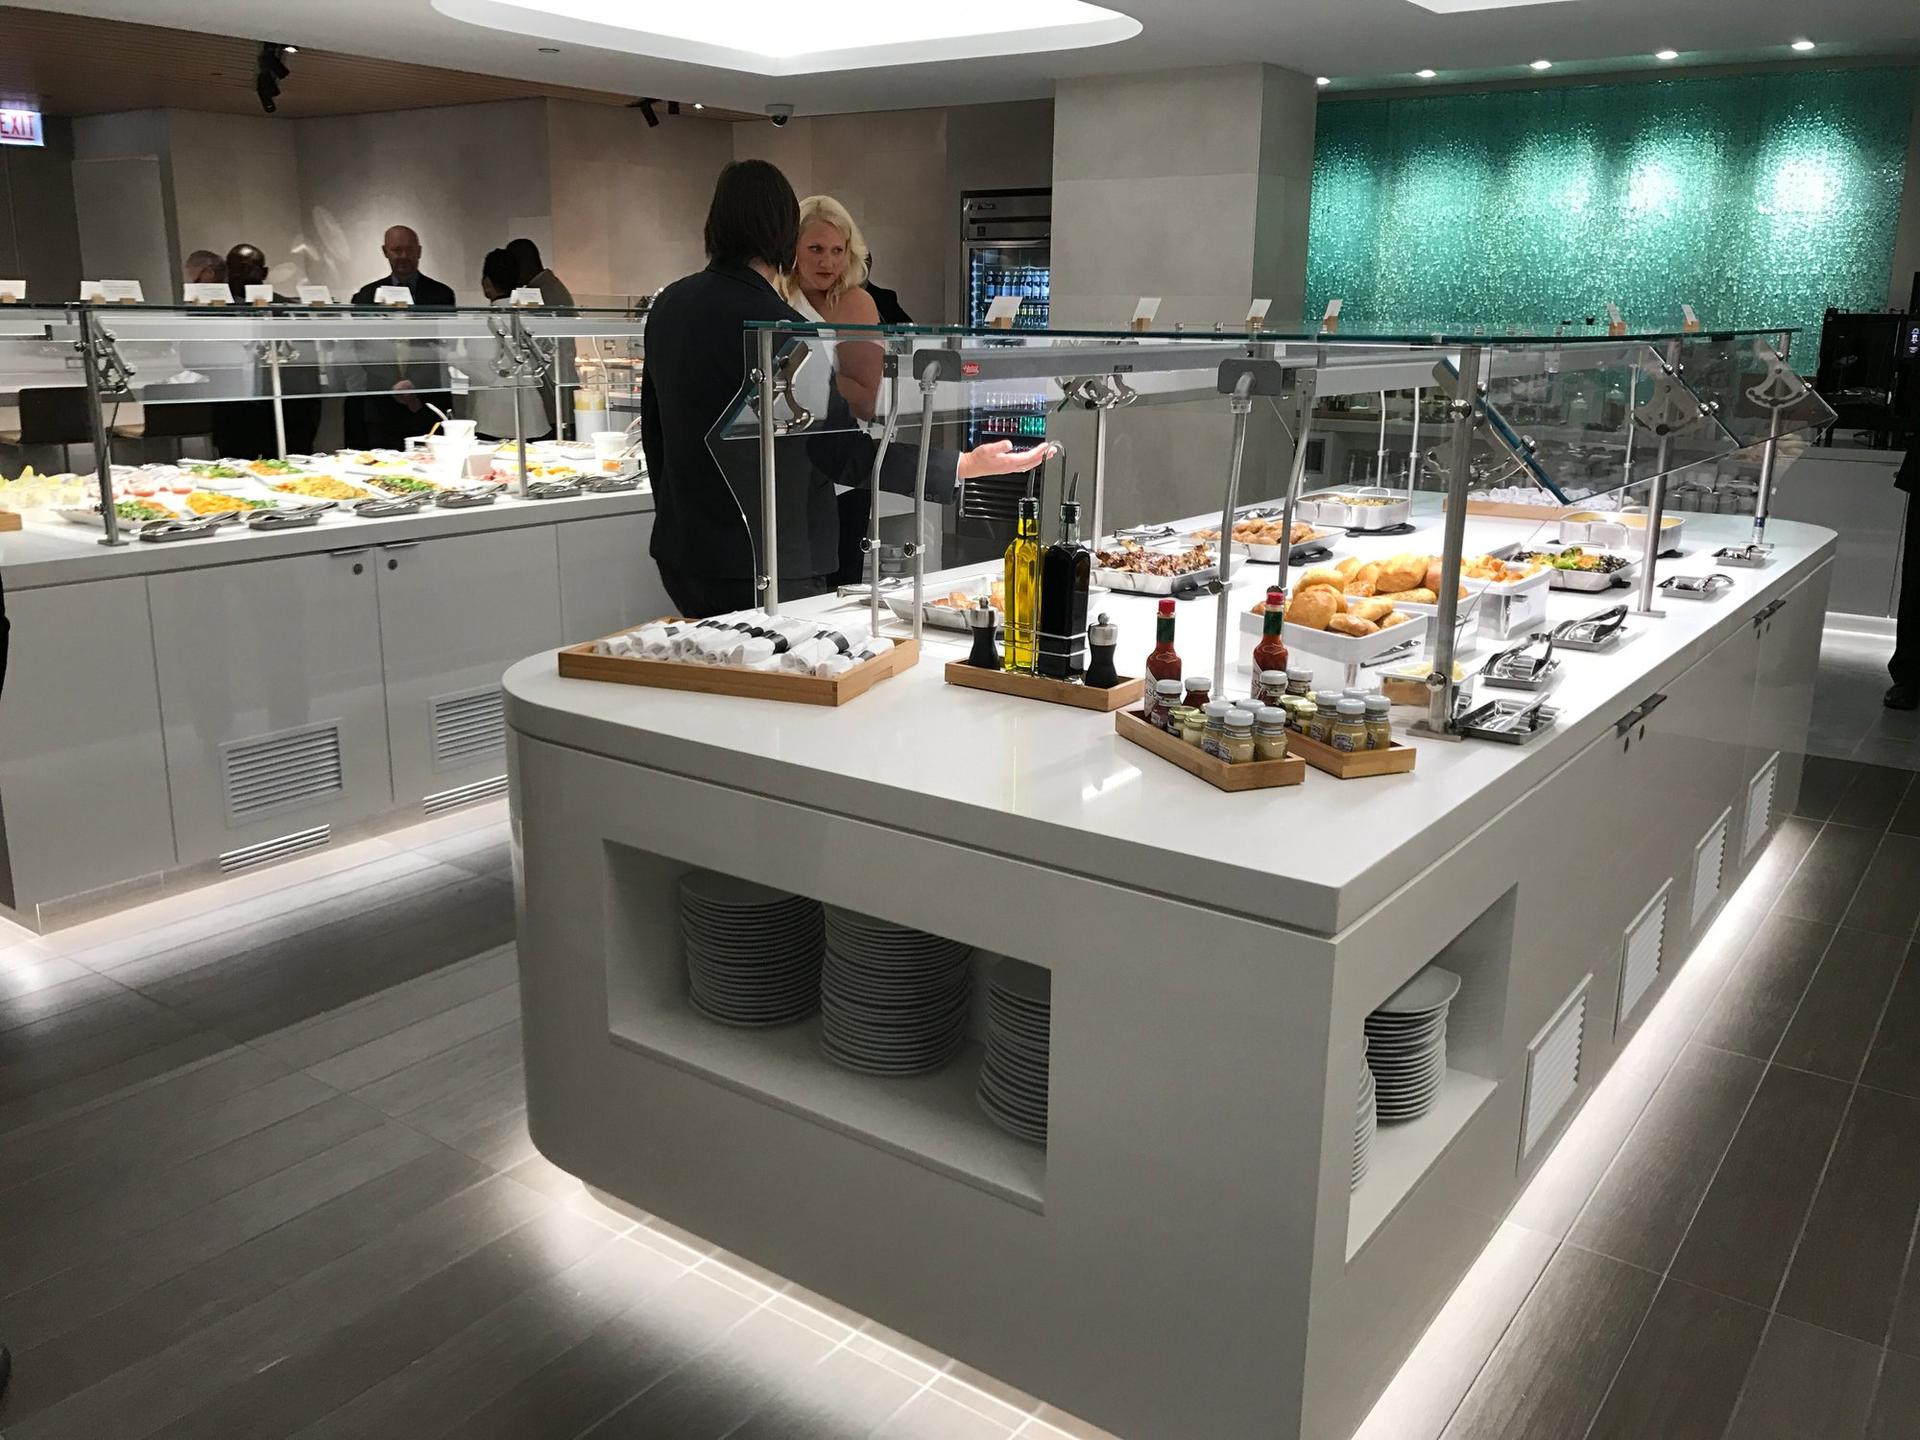 American Airlines Flagship Lounge image 4 of 13